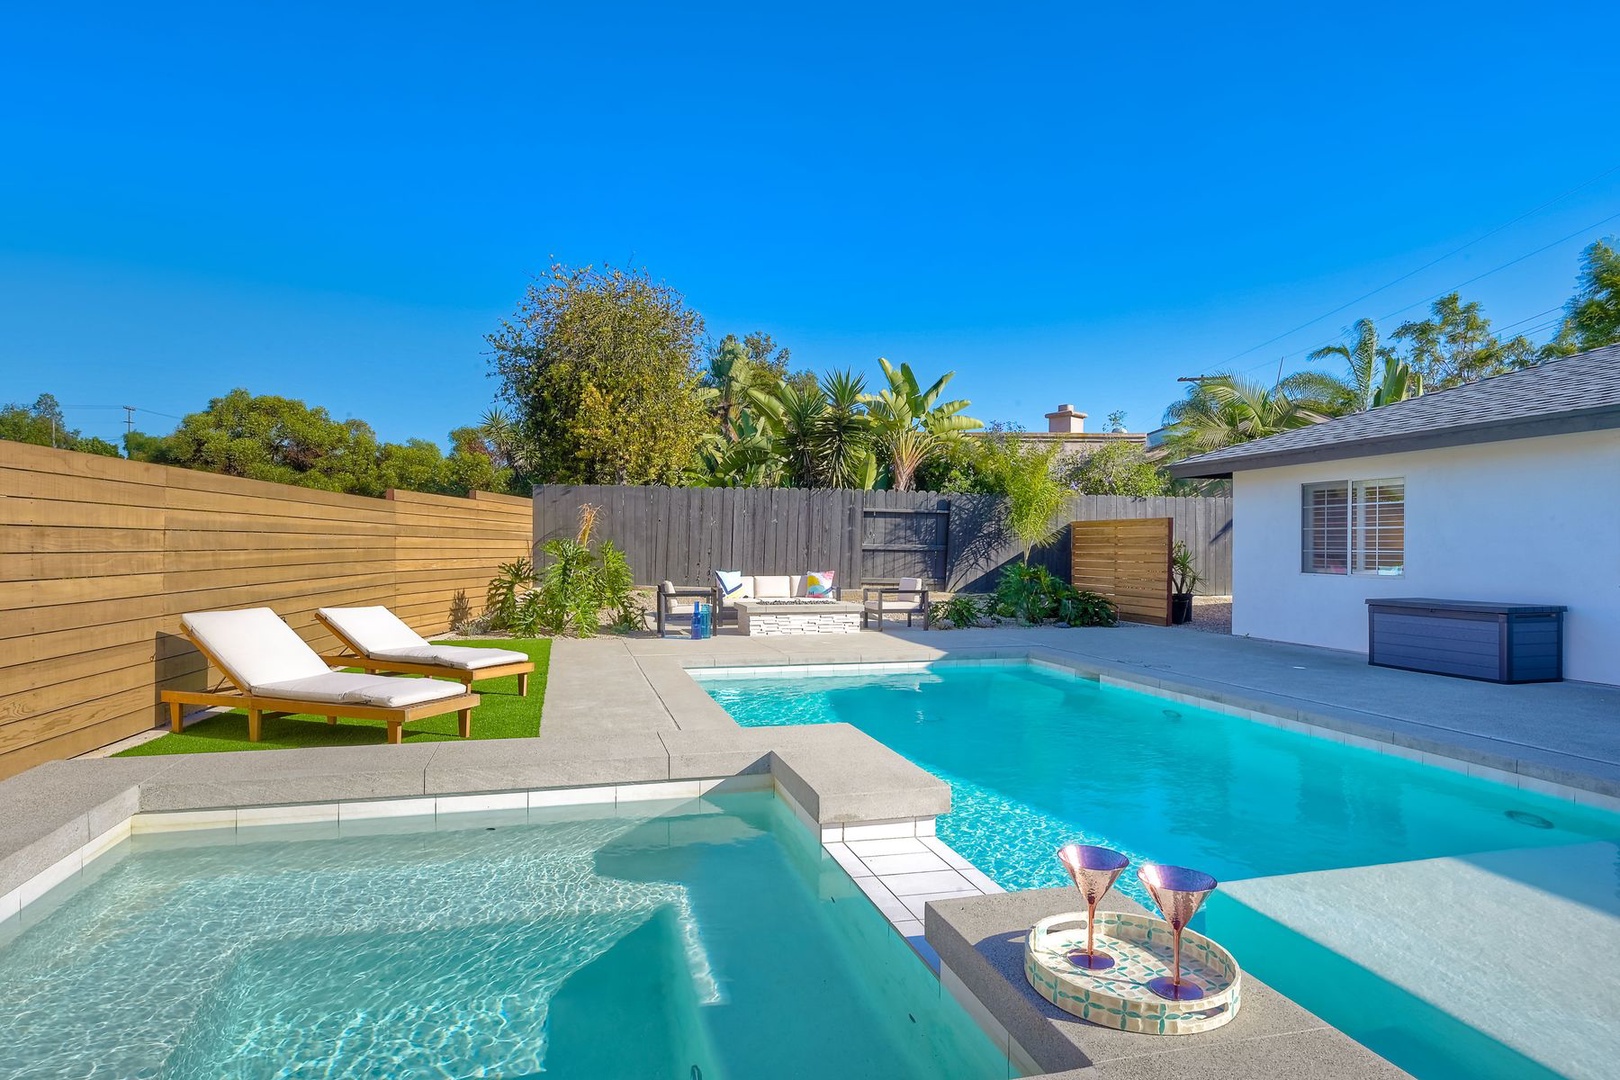 Lounge the day away by your own private pool or make a splash!